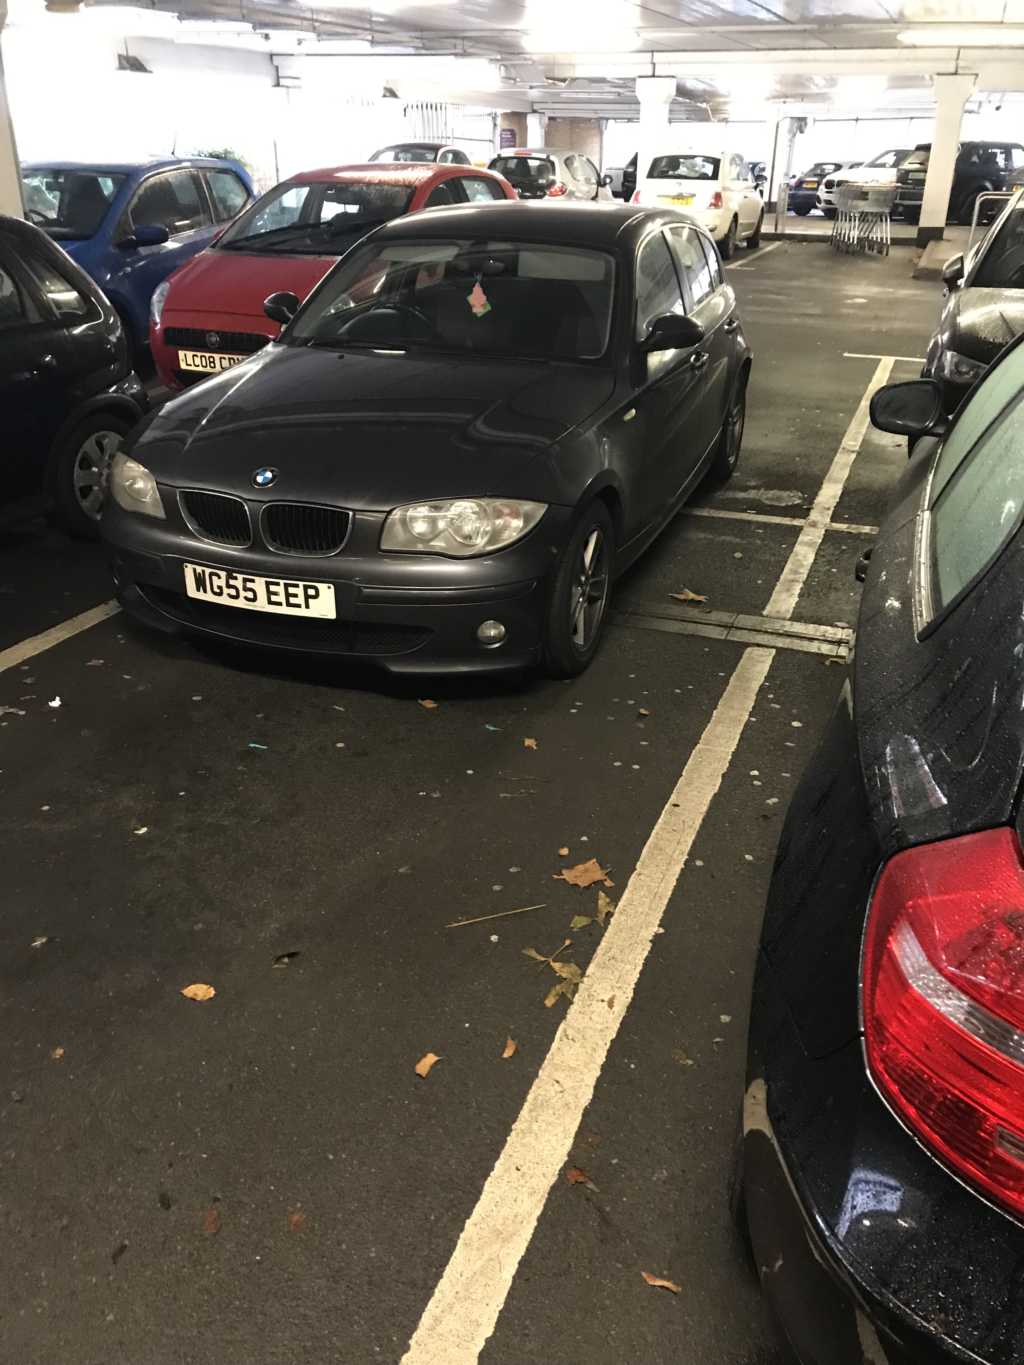 WG55EEP is an Inconsiderate Parker